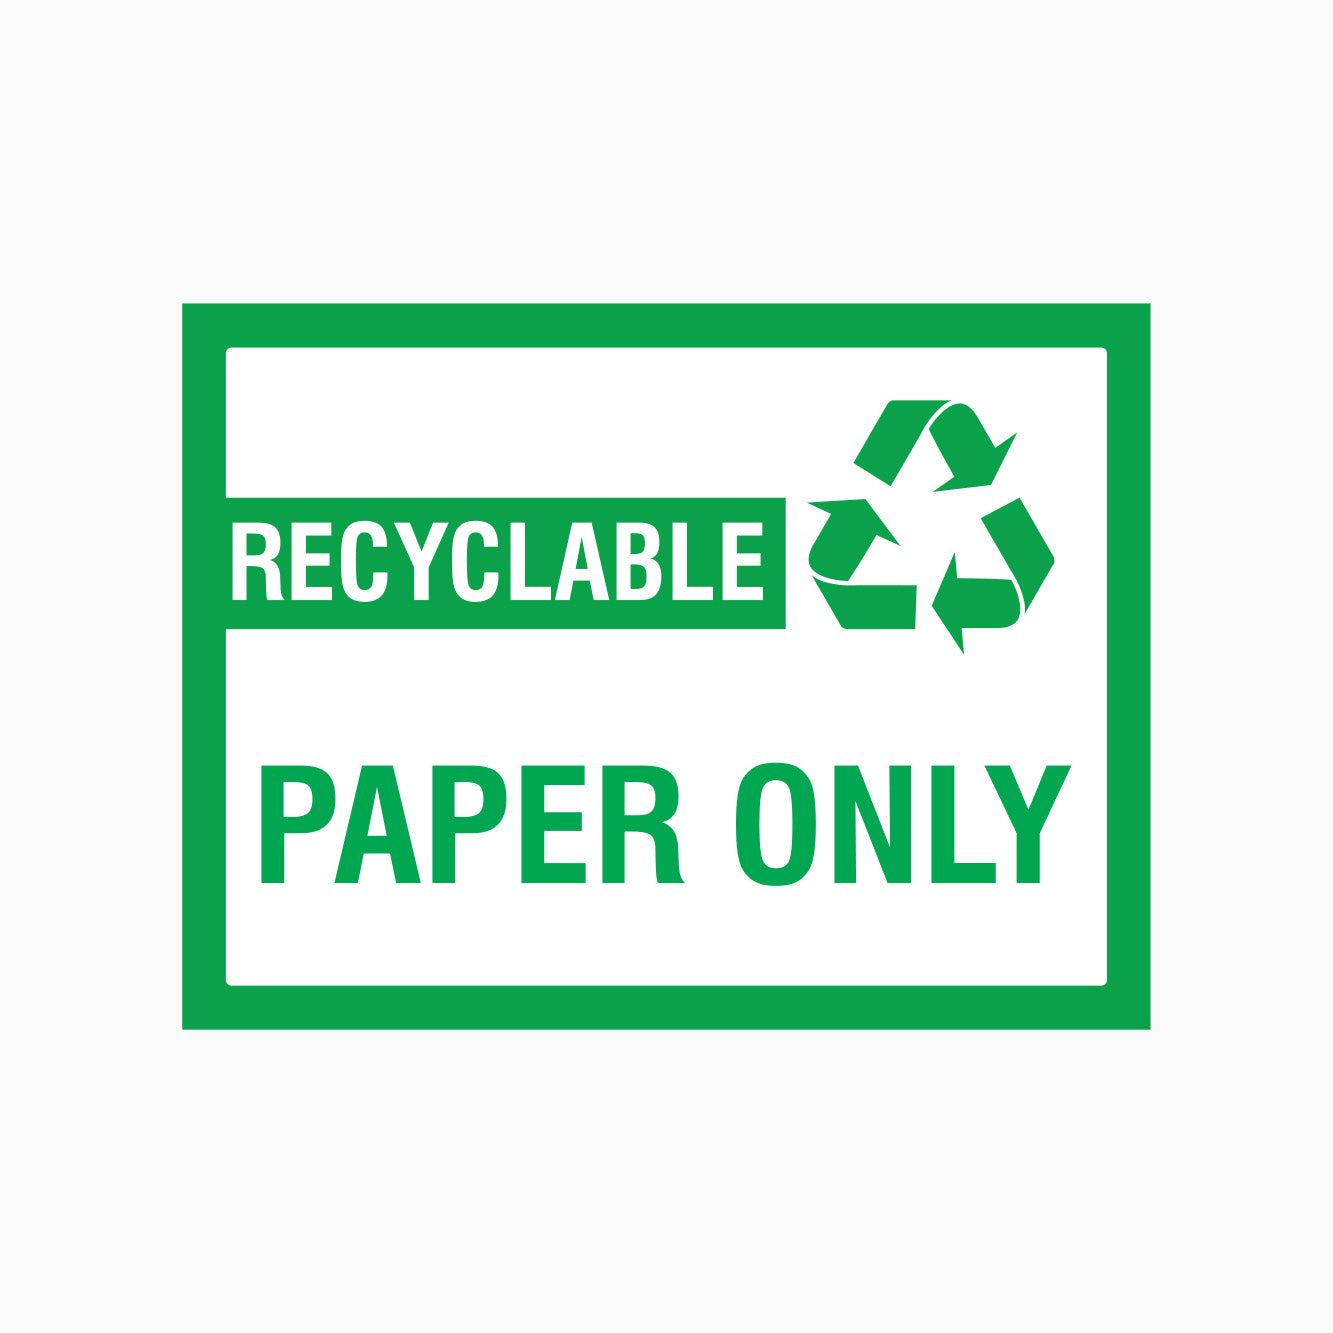 Recycling Signs - Shop Online - RECYCLABLE PAPER ONLY SIGN